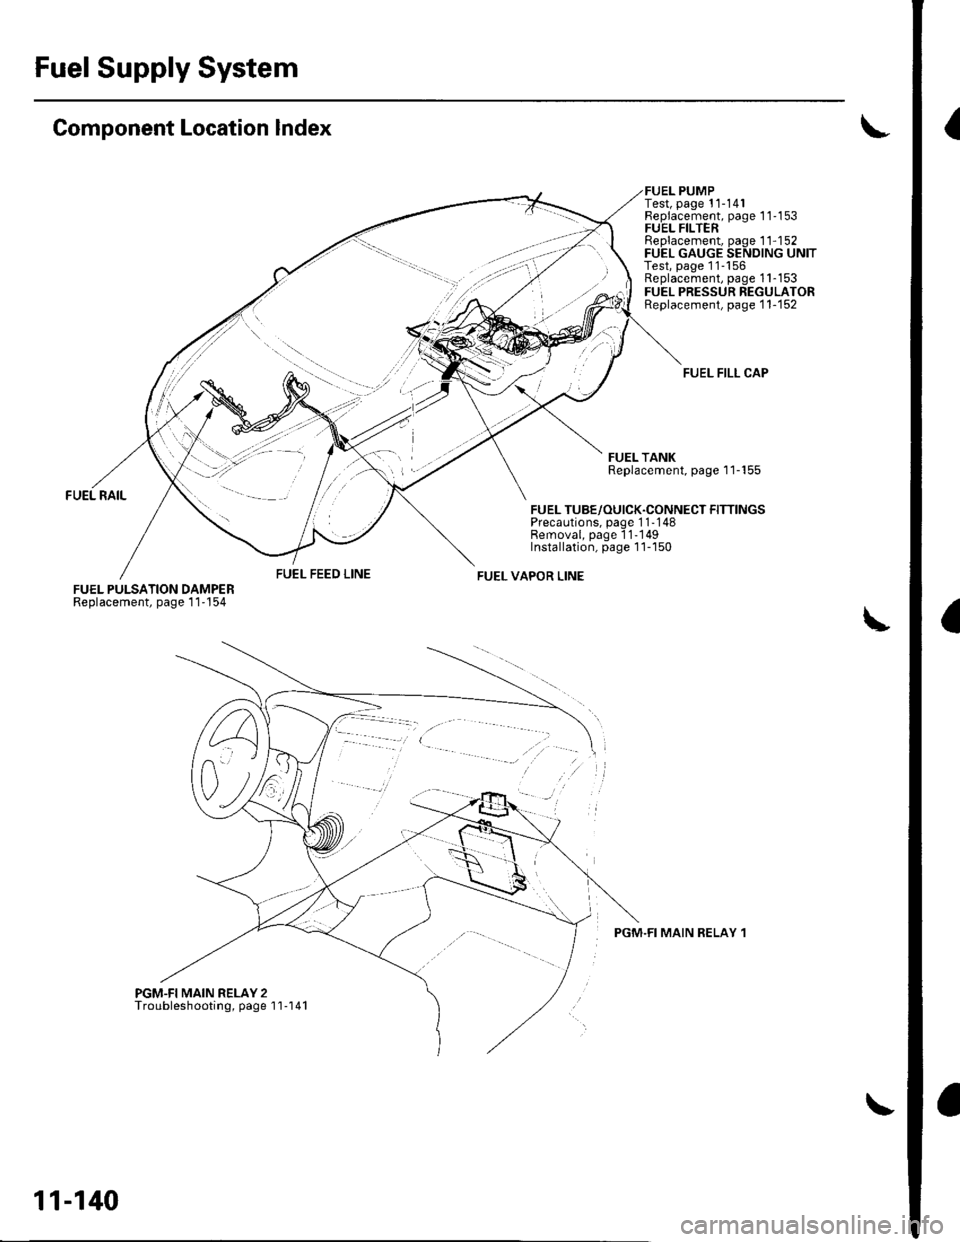 HONDA CIVIC 2003 7.G Workshop Manual Fuel Supply System
{
a
Component Location Index
FUEL FEED LINEFUEL PULSATION DAMPERReplacement, page 1 1154
PGM.FI MAIN RELAY 2Troubleshooting, pagell-141
FUEL TUBE/OUICK.CONNECT FITTINGSPrecaution